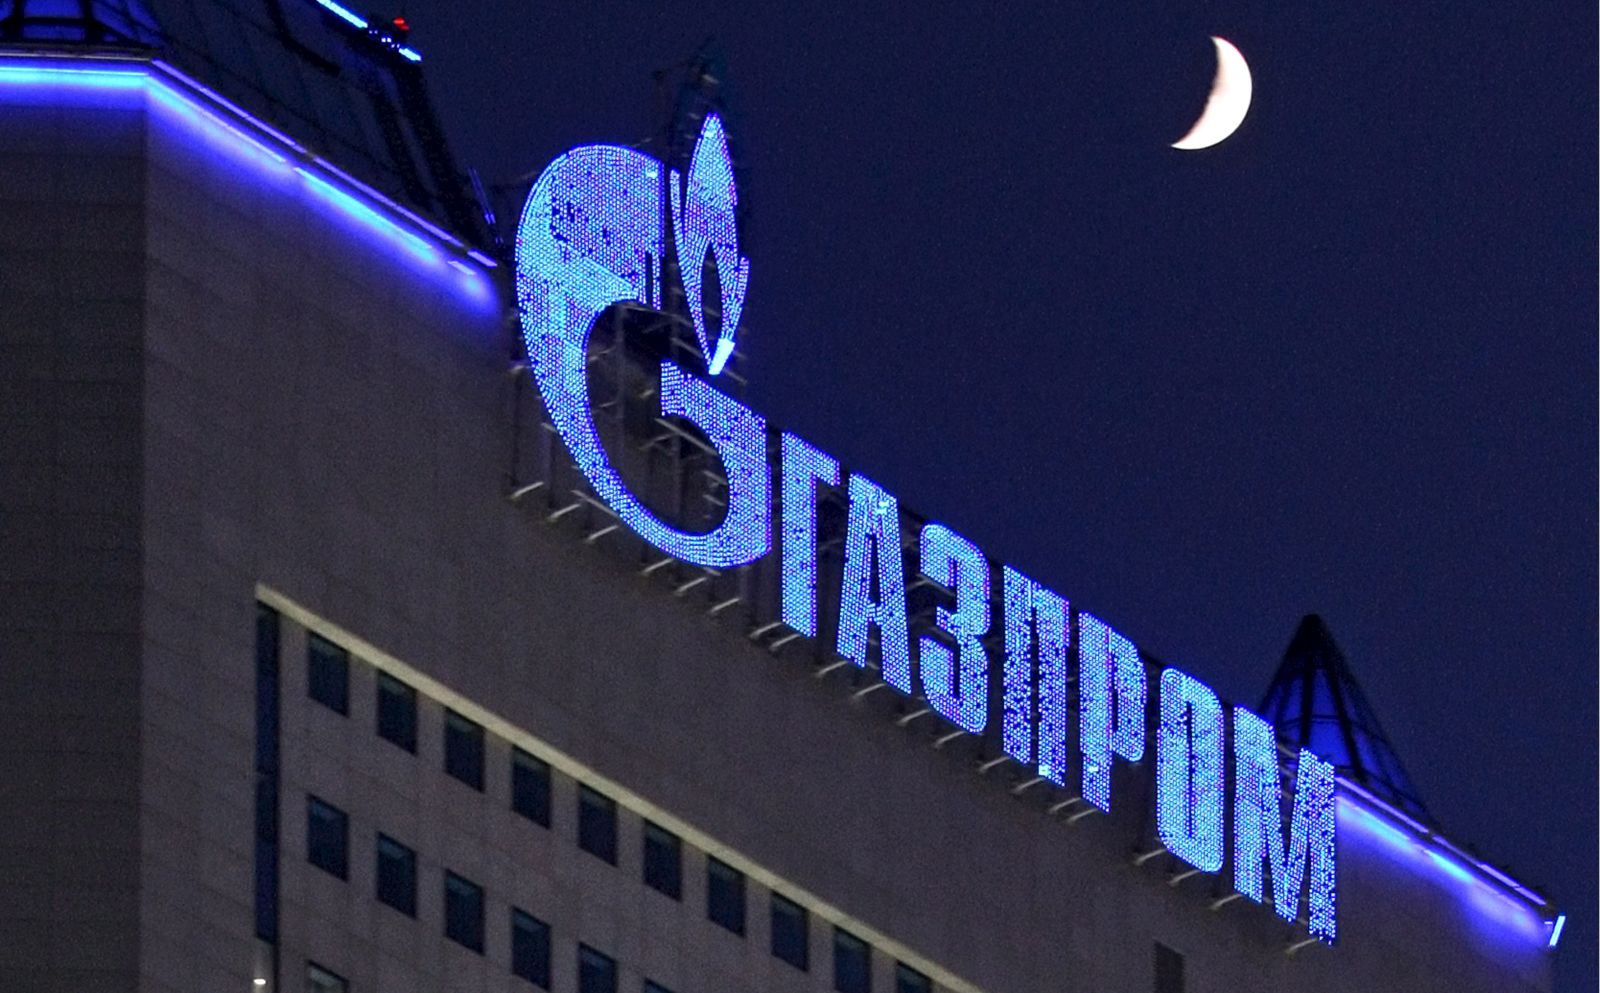 epa09792292 (FILE) - The logo of Russian gas company Gazprom illuminated on Gazprom headquarters in Moscow, Russia, 02 January 2009 (re-issued on 28 February 2022). The European football governing body UEFA announced on 28 February 2022 to have ended its partnership with Gazprom across all competitions. 'The decision -announced UEFA- is effective immediately and covers all existing agreements including the UEFA Champions League, UEFA national team competitions and UEFA EURO 2024'.  EPA/SERGEI ILNITSKY